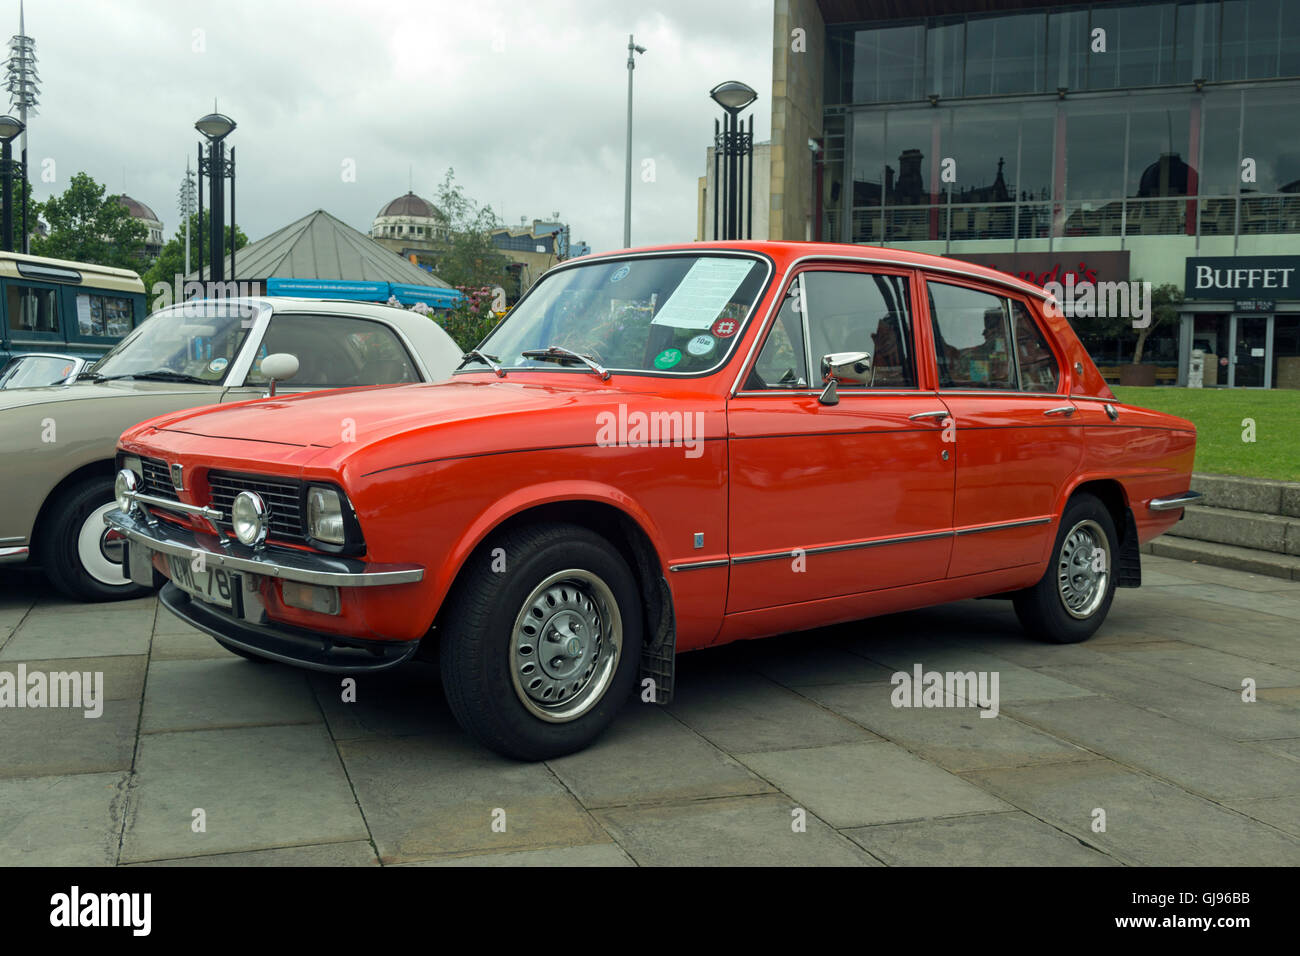 Triumph Dolomite 1300 High Resolution Stock Photography and Images - Alamy